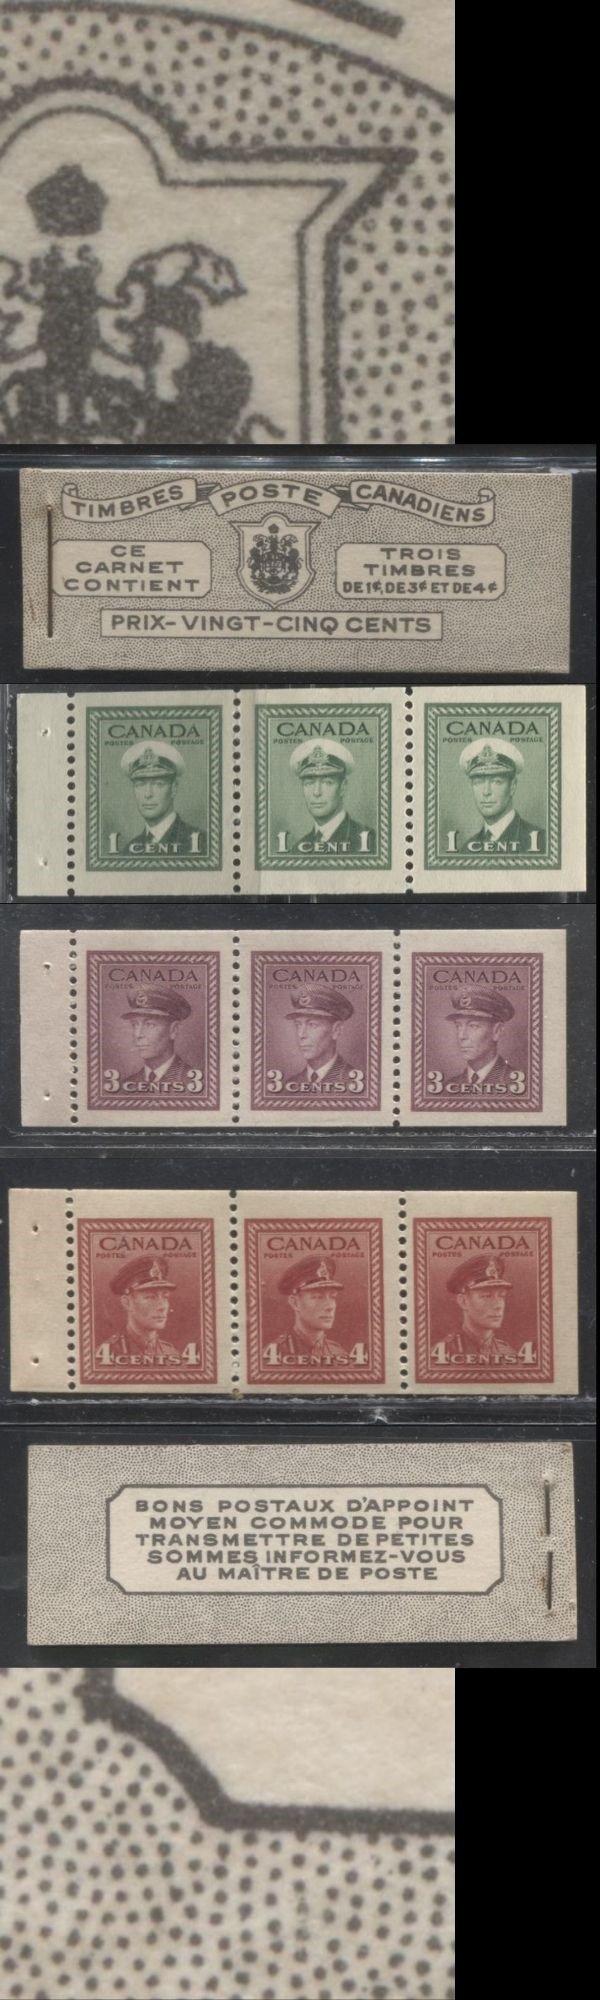 Lot 208 Canada #BK38a 1942-1949 War Issue Complete 25c, French Booklet Containing 1 Pane Each of 3 of 1c Green, 3c Rosy Plum and 4c Carmine Red, Harris Front Cover Type Ve , Back Cover Jv, 7c & 6c Rate Page